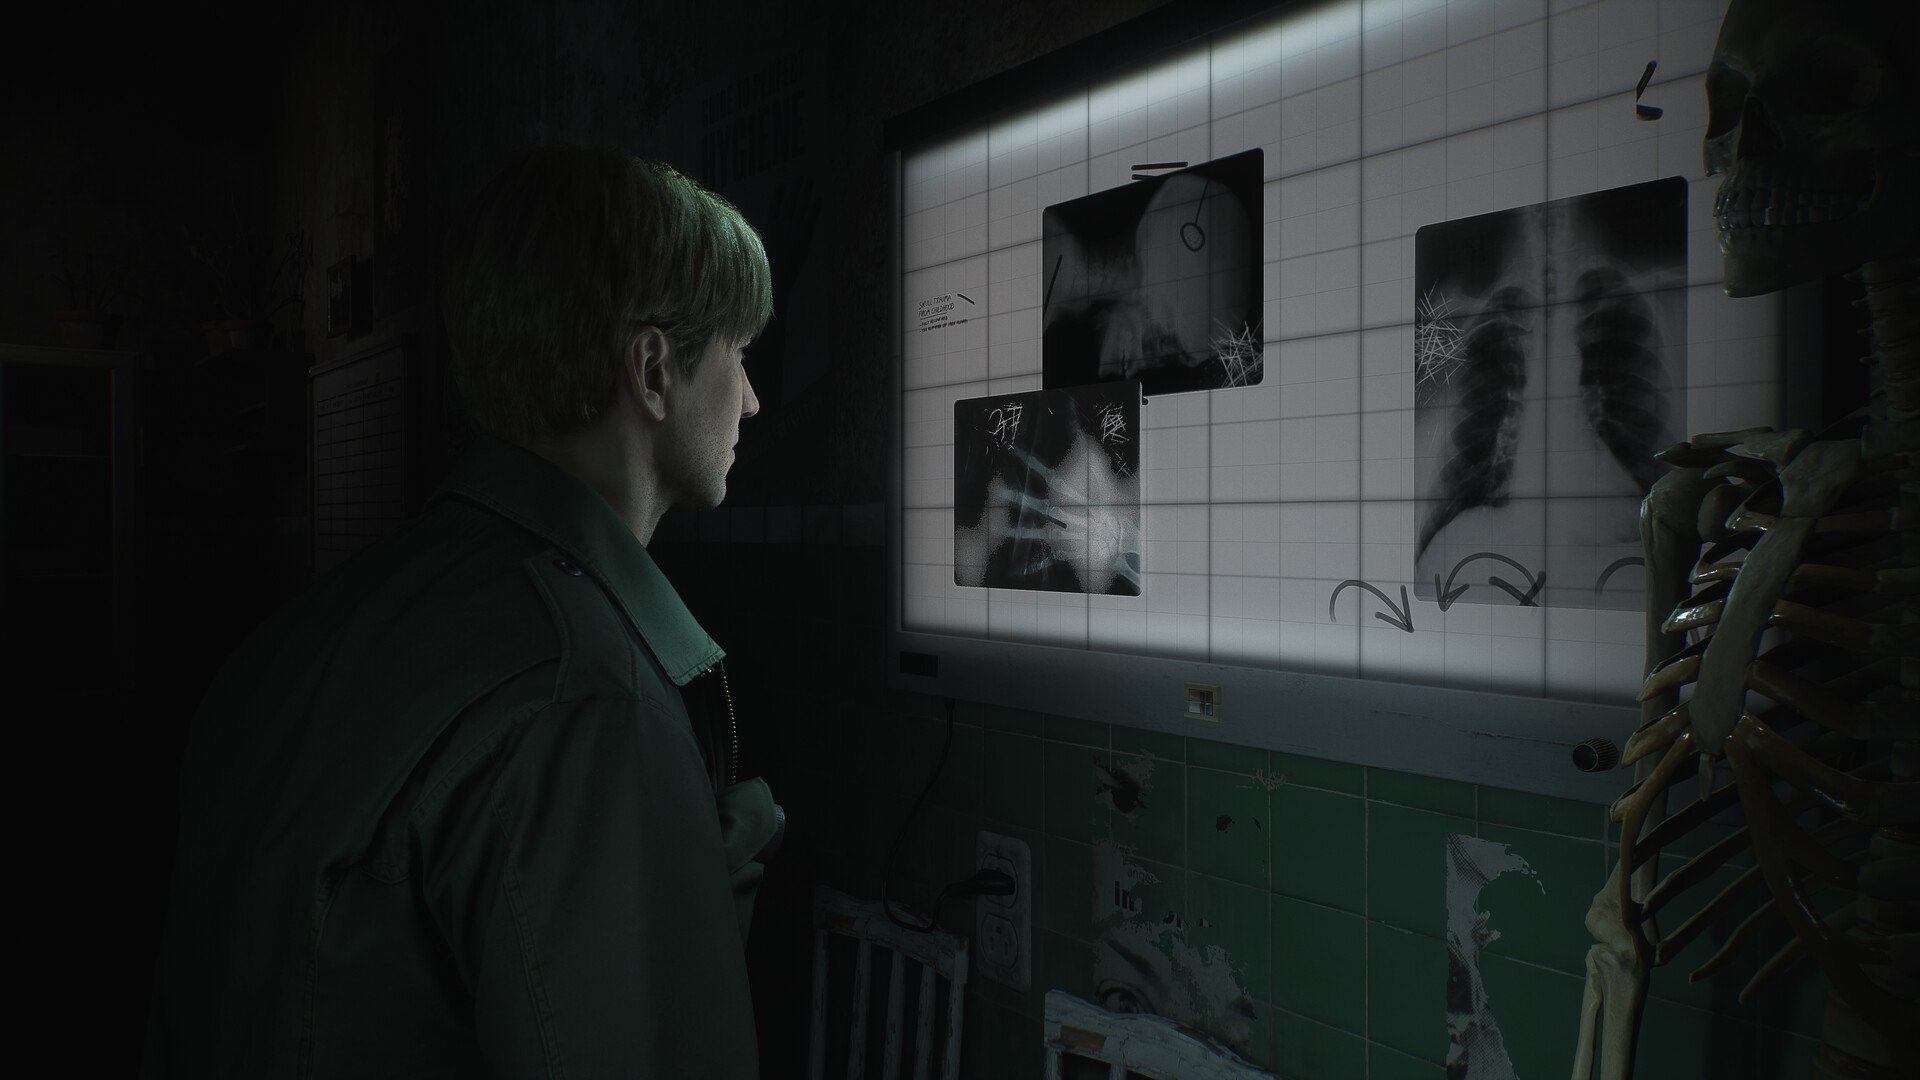 Silent Hill 2 finally coming to PC in its full glory with a Teaser Trailer  - News - Gamesplanet.com